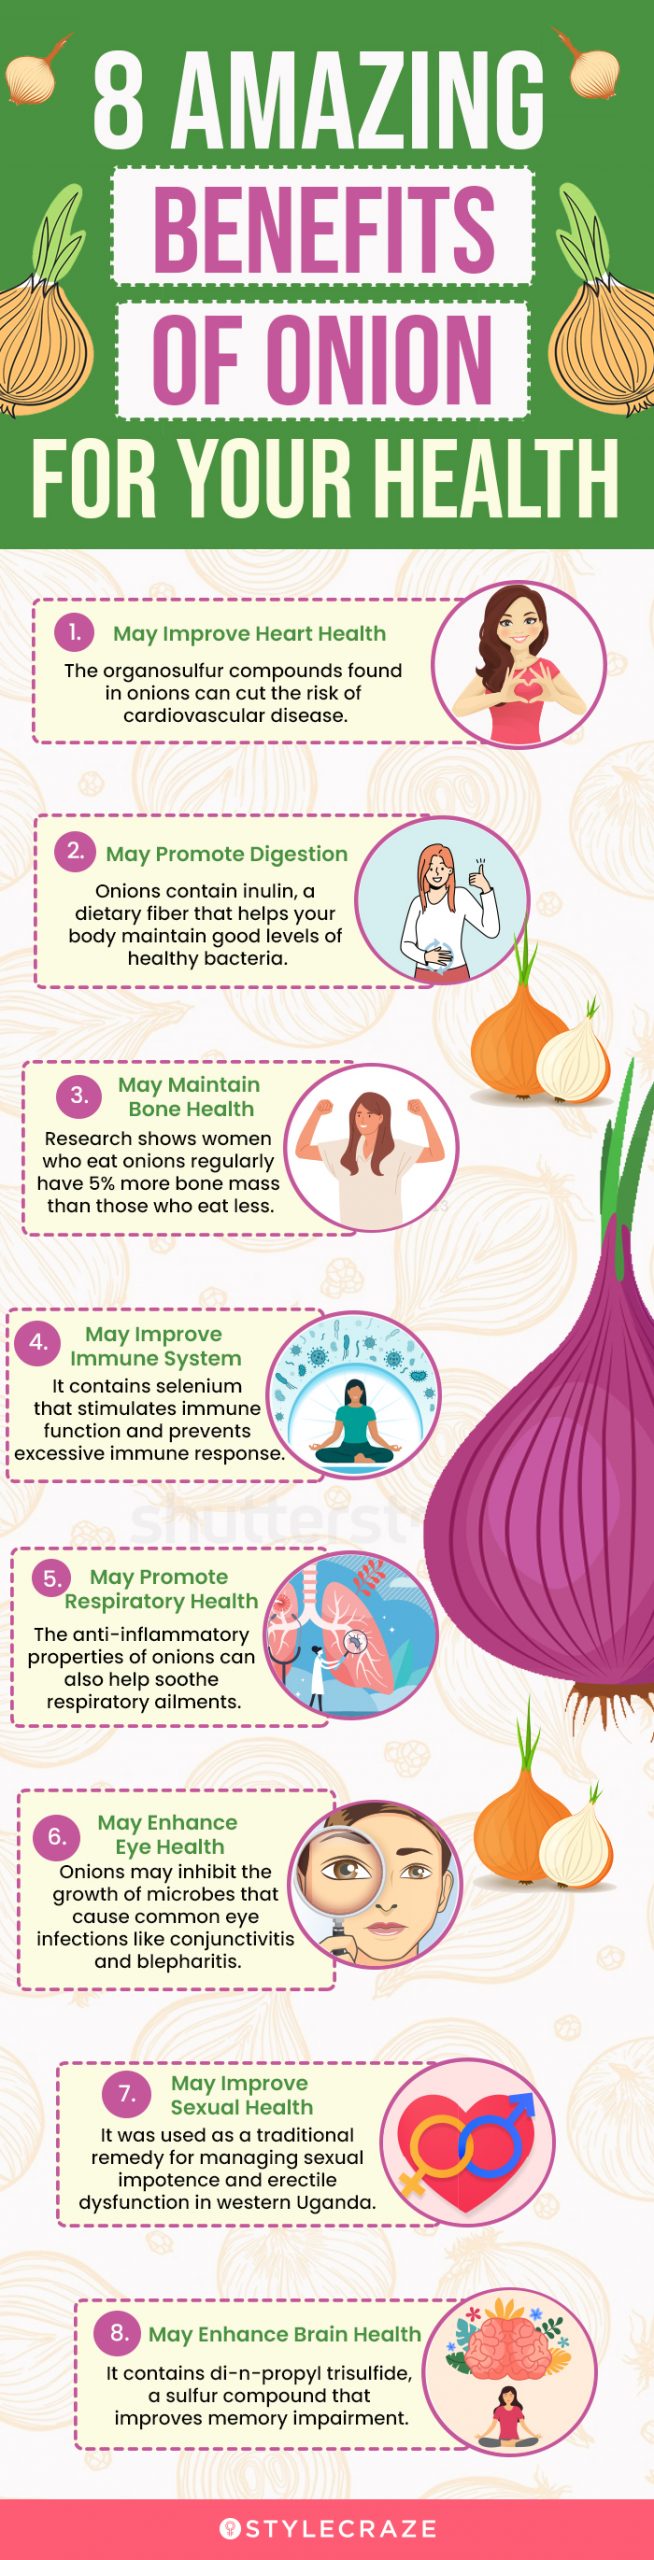 31 Benefits Of Onions, Nutritional Value, And Side Effects